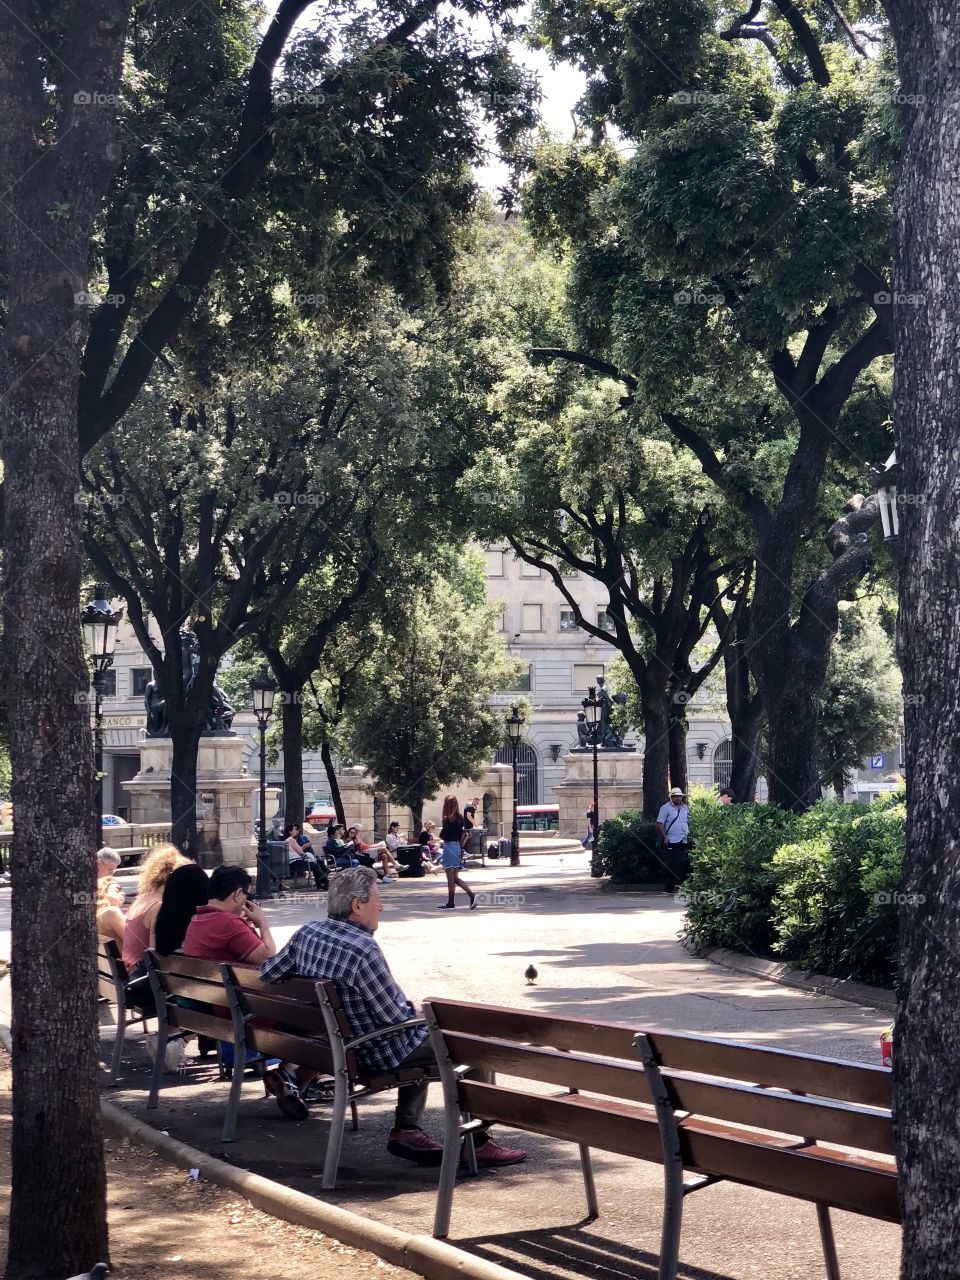 Tree, Park, Outdoors, Bench, People